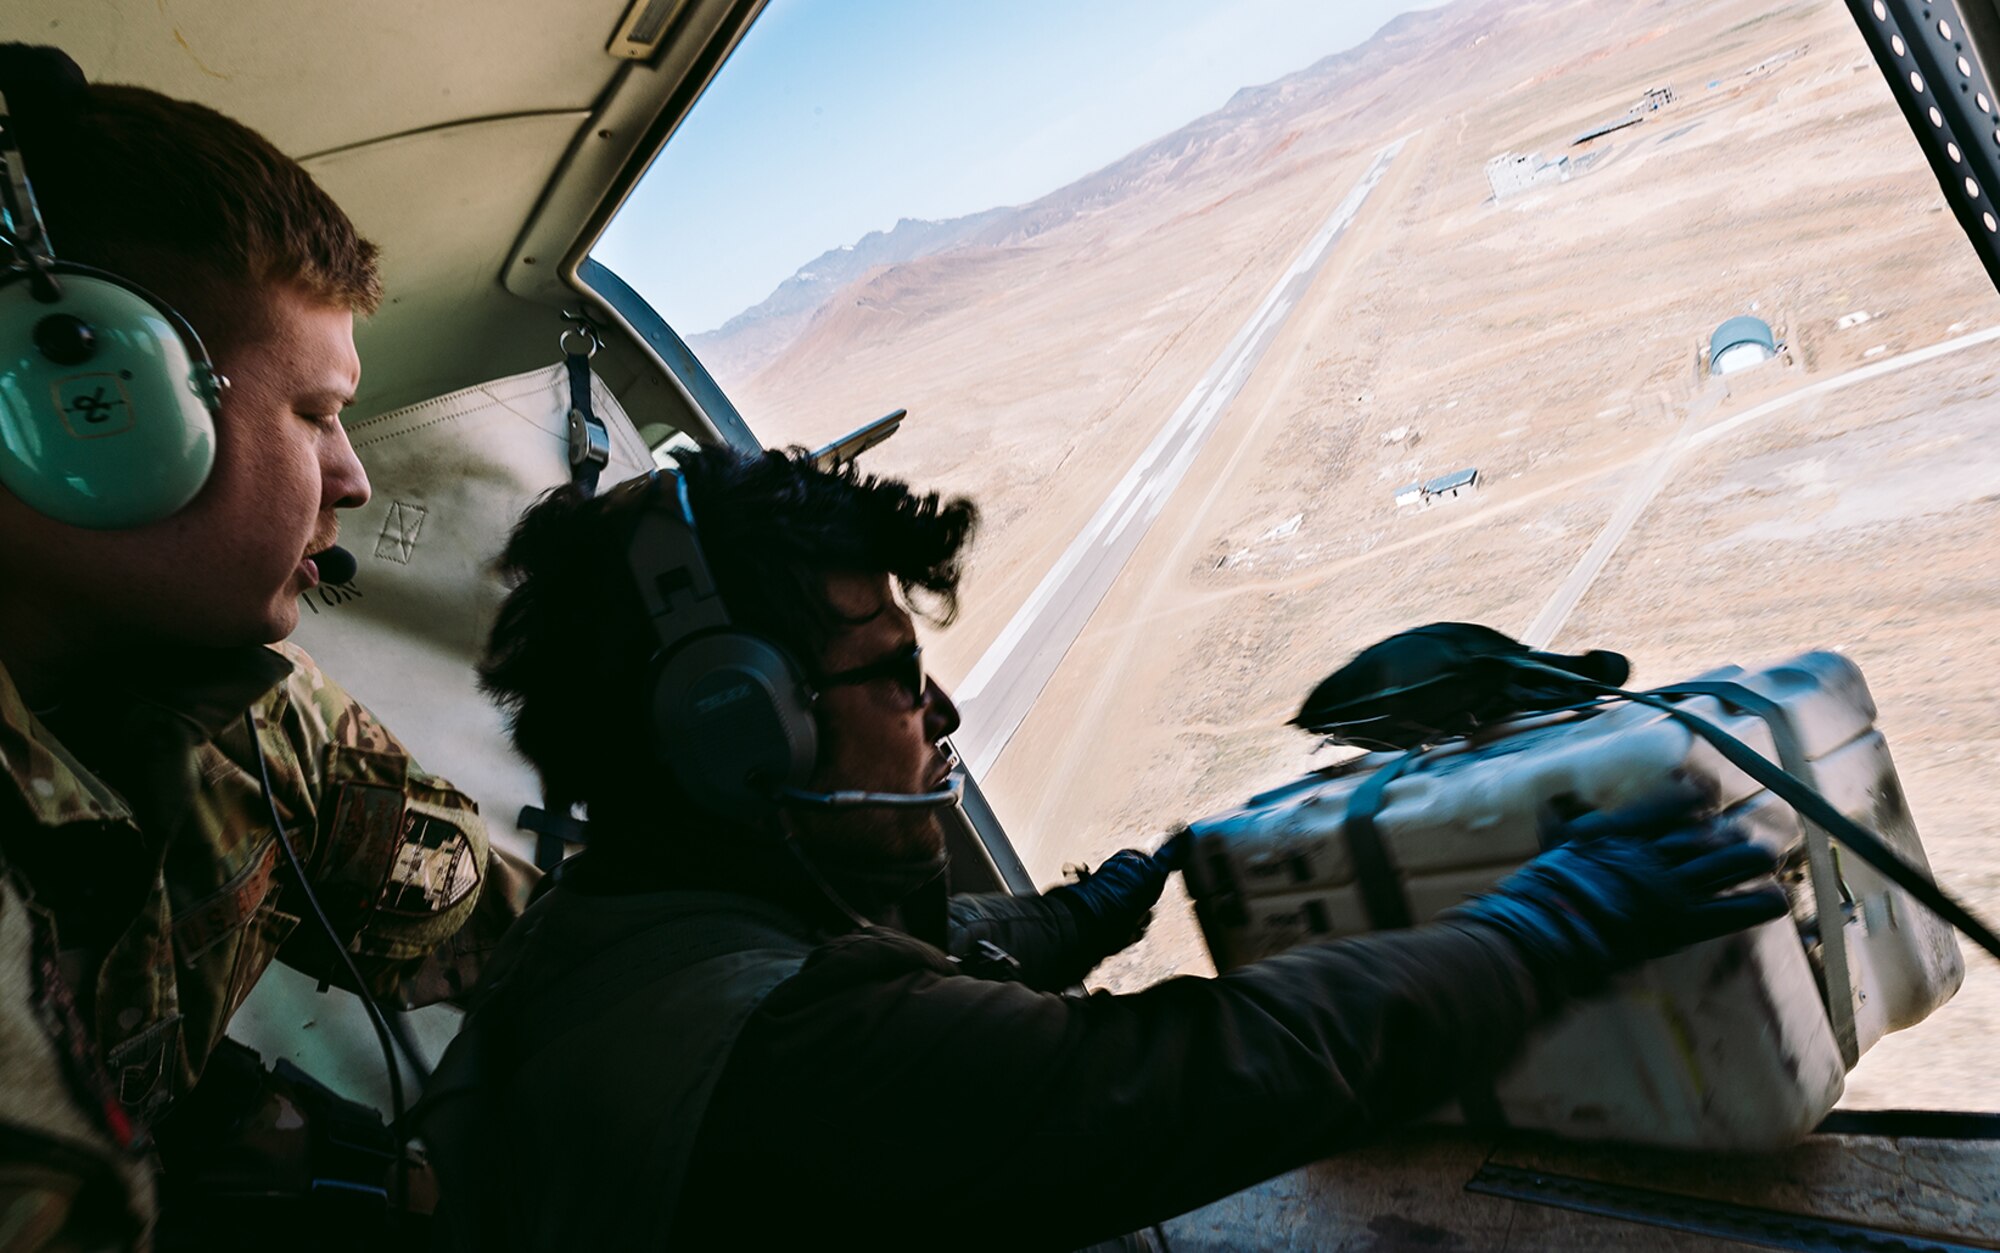 An Afghan Air Force member training with Train, Advise, Assist Command-Air, as part of Resolute Support Mission, works in tandem with an advisor to practice air drops near Kabul, Afghanistan, March 19, 2017. The TAAC-Air advisors foster working relationships and fortify confidence in the mission. (U.S. Air Force photo by Senior Airman Jordan Castelan)